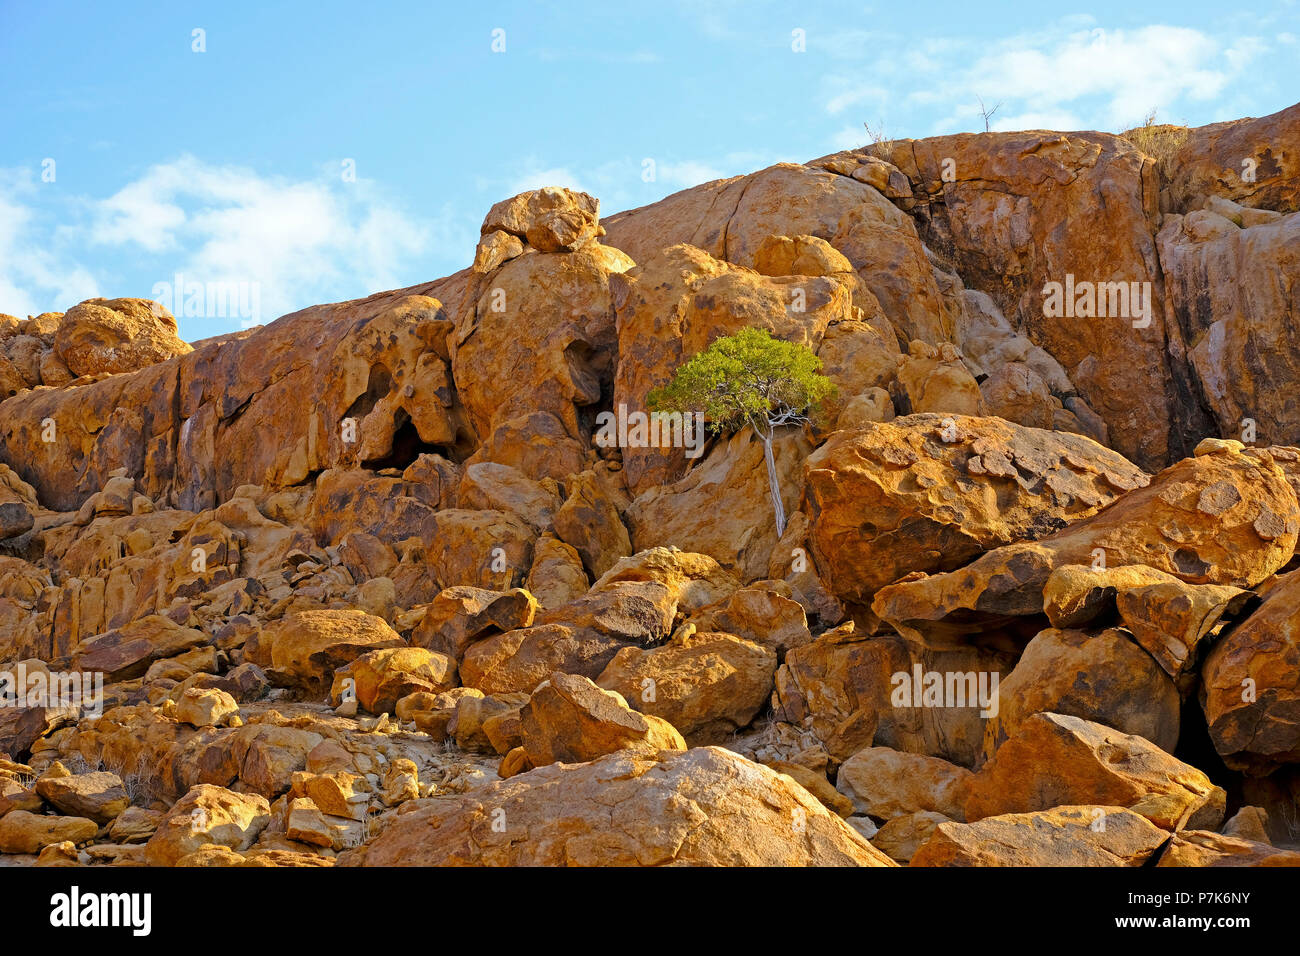 rugged granite rocks with hill of slip rock and tree in the rock, Brandberg area in Namibia, Damaraland Stock Photo